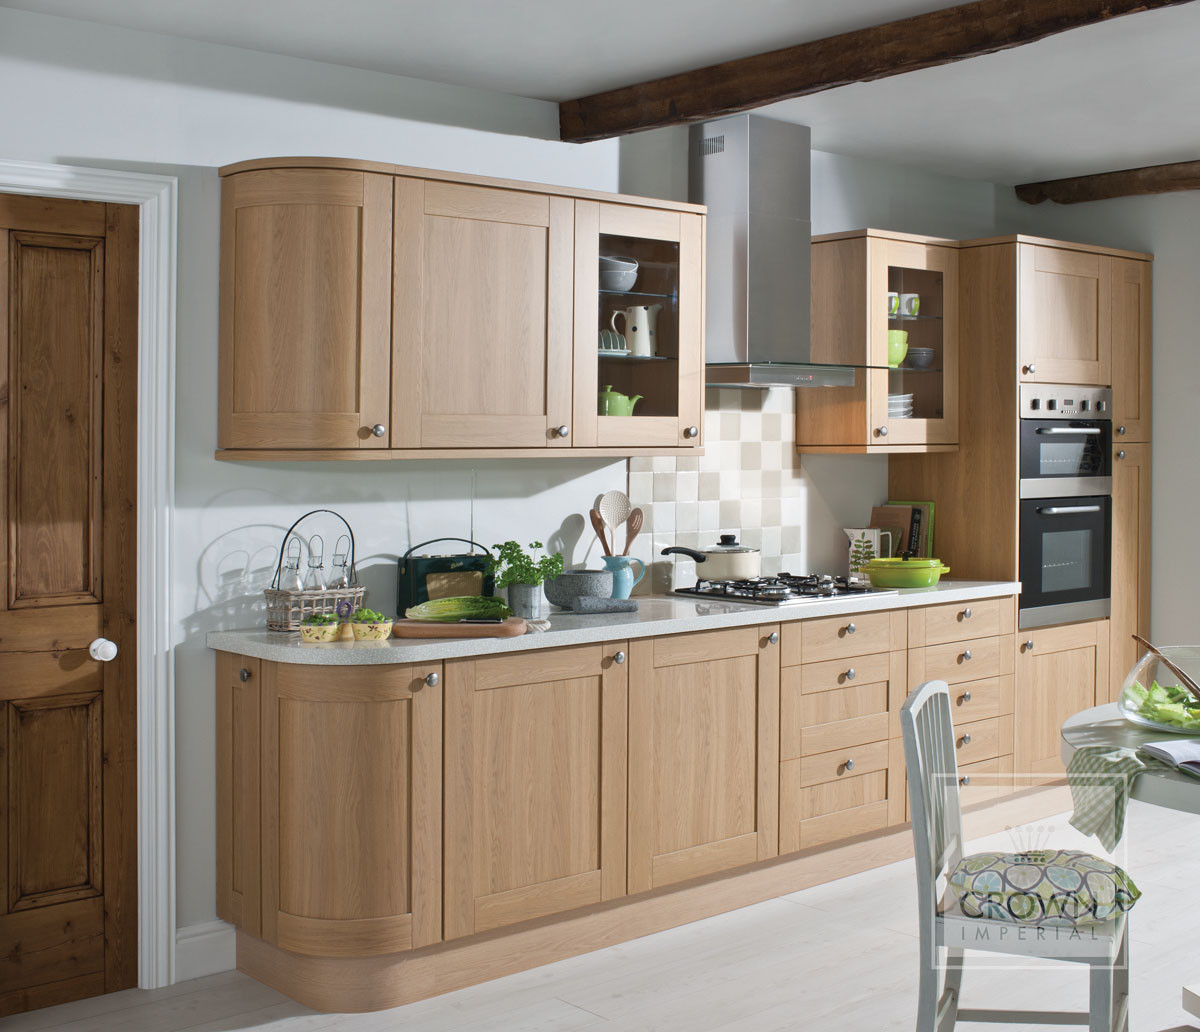 Small Kitchen Design Ideas
 Three top tips for small kitchen design